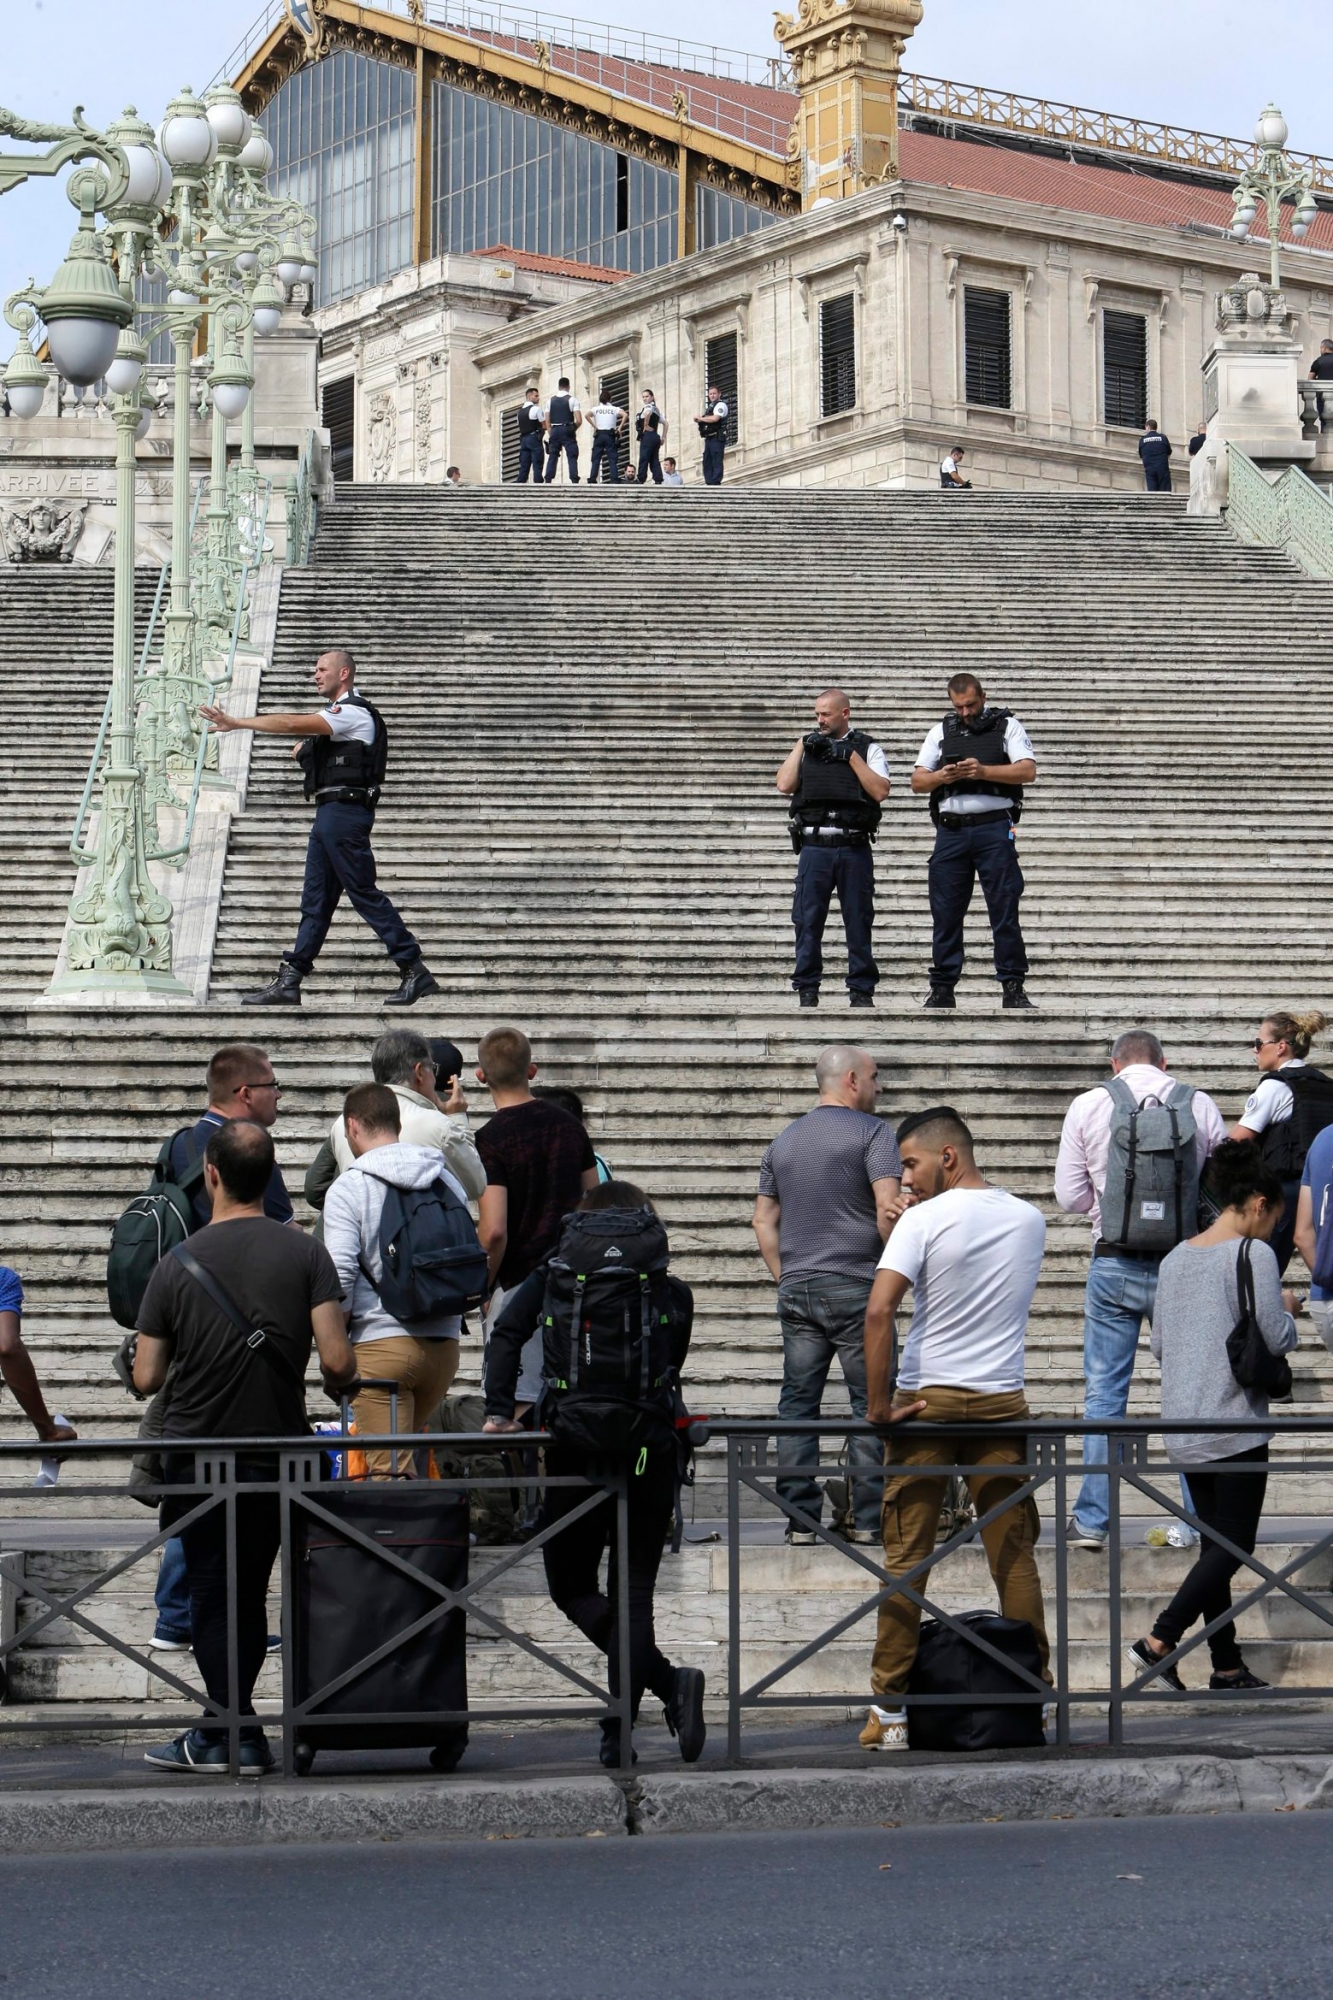 French police officers block access on the stairs leading to Marseille 's main train station, Sunday, Oct. 1, 2017 in Marseille, southern France. French police warn people to avoid Marseille's main train station amid reports of knife attack, assailant shot dead. (AP Photo/Claude Paris) France Knife Attack